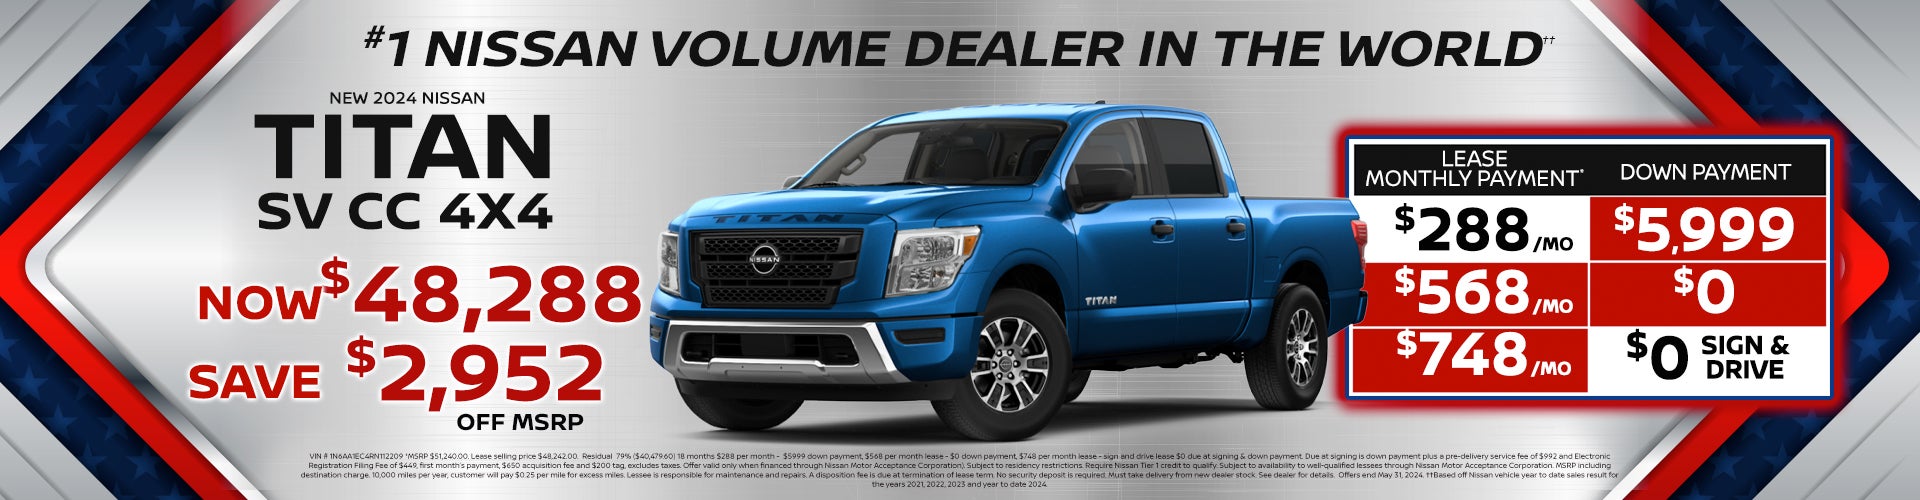 2024 Nissan Titan lease as low as $498 per month lease